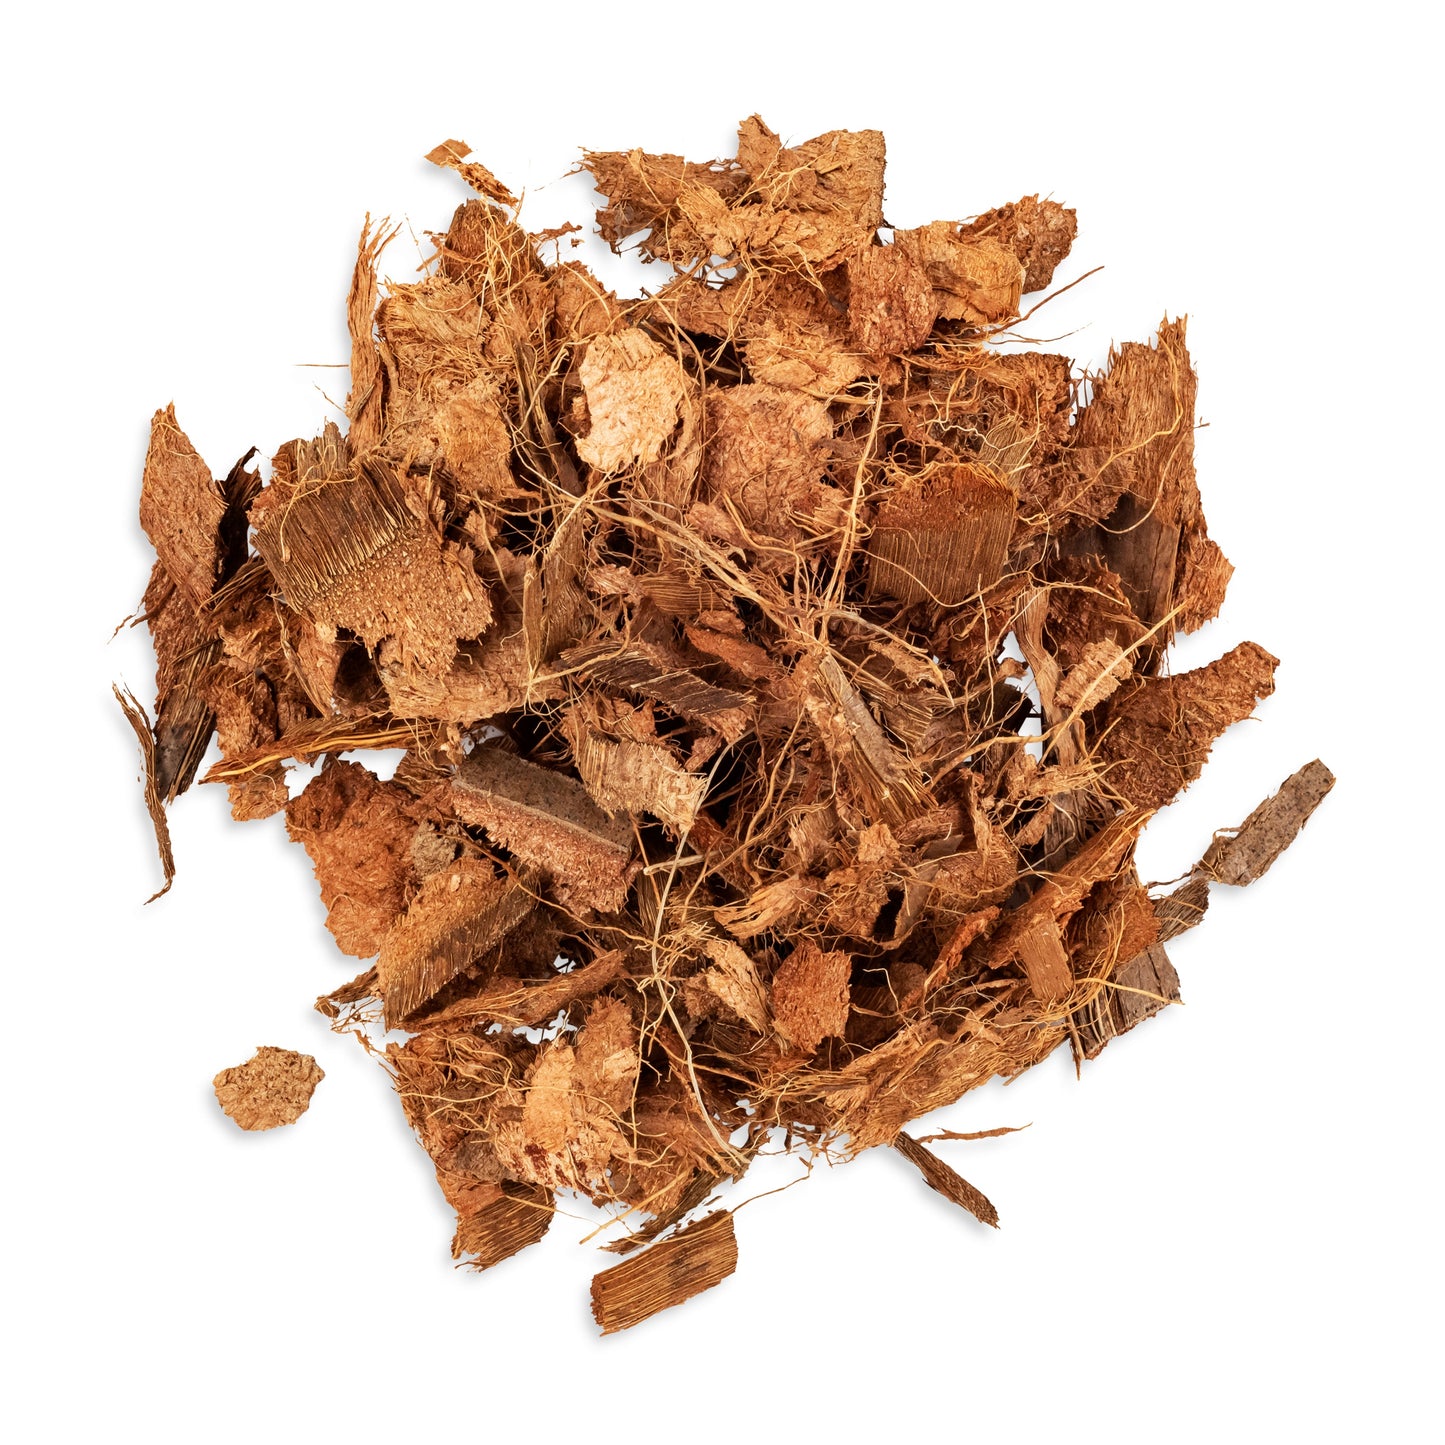 pieces of coconut husk and fiber for gardening mulch